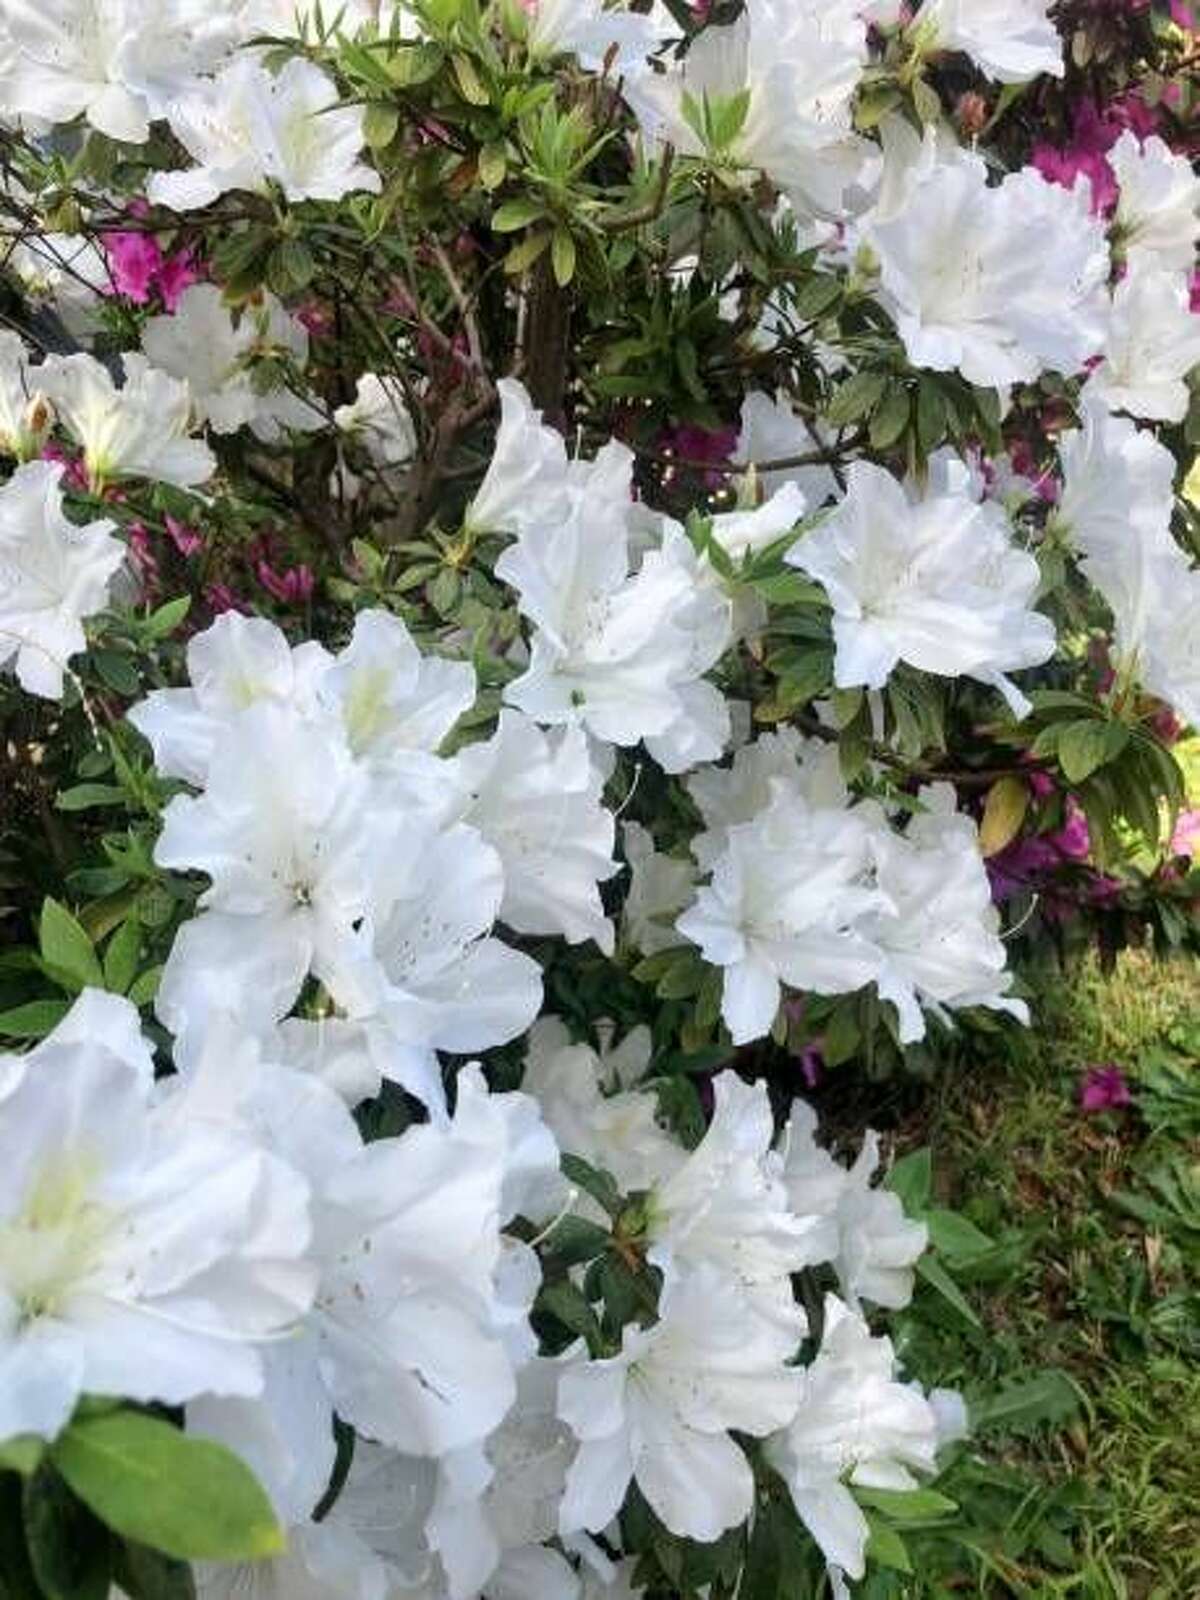 4) Azalea: Azaleas are a sure sign that spring has arrived. Many new varieties of this shrub are more cold-tolerant, so you can grow them farther north. They need mostly sun. Make sure to choose one for your USDA Hardiness zone. SHOP AZALEAS